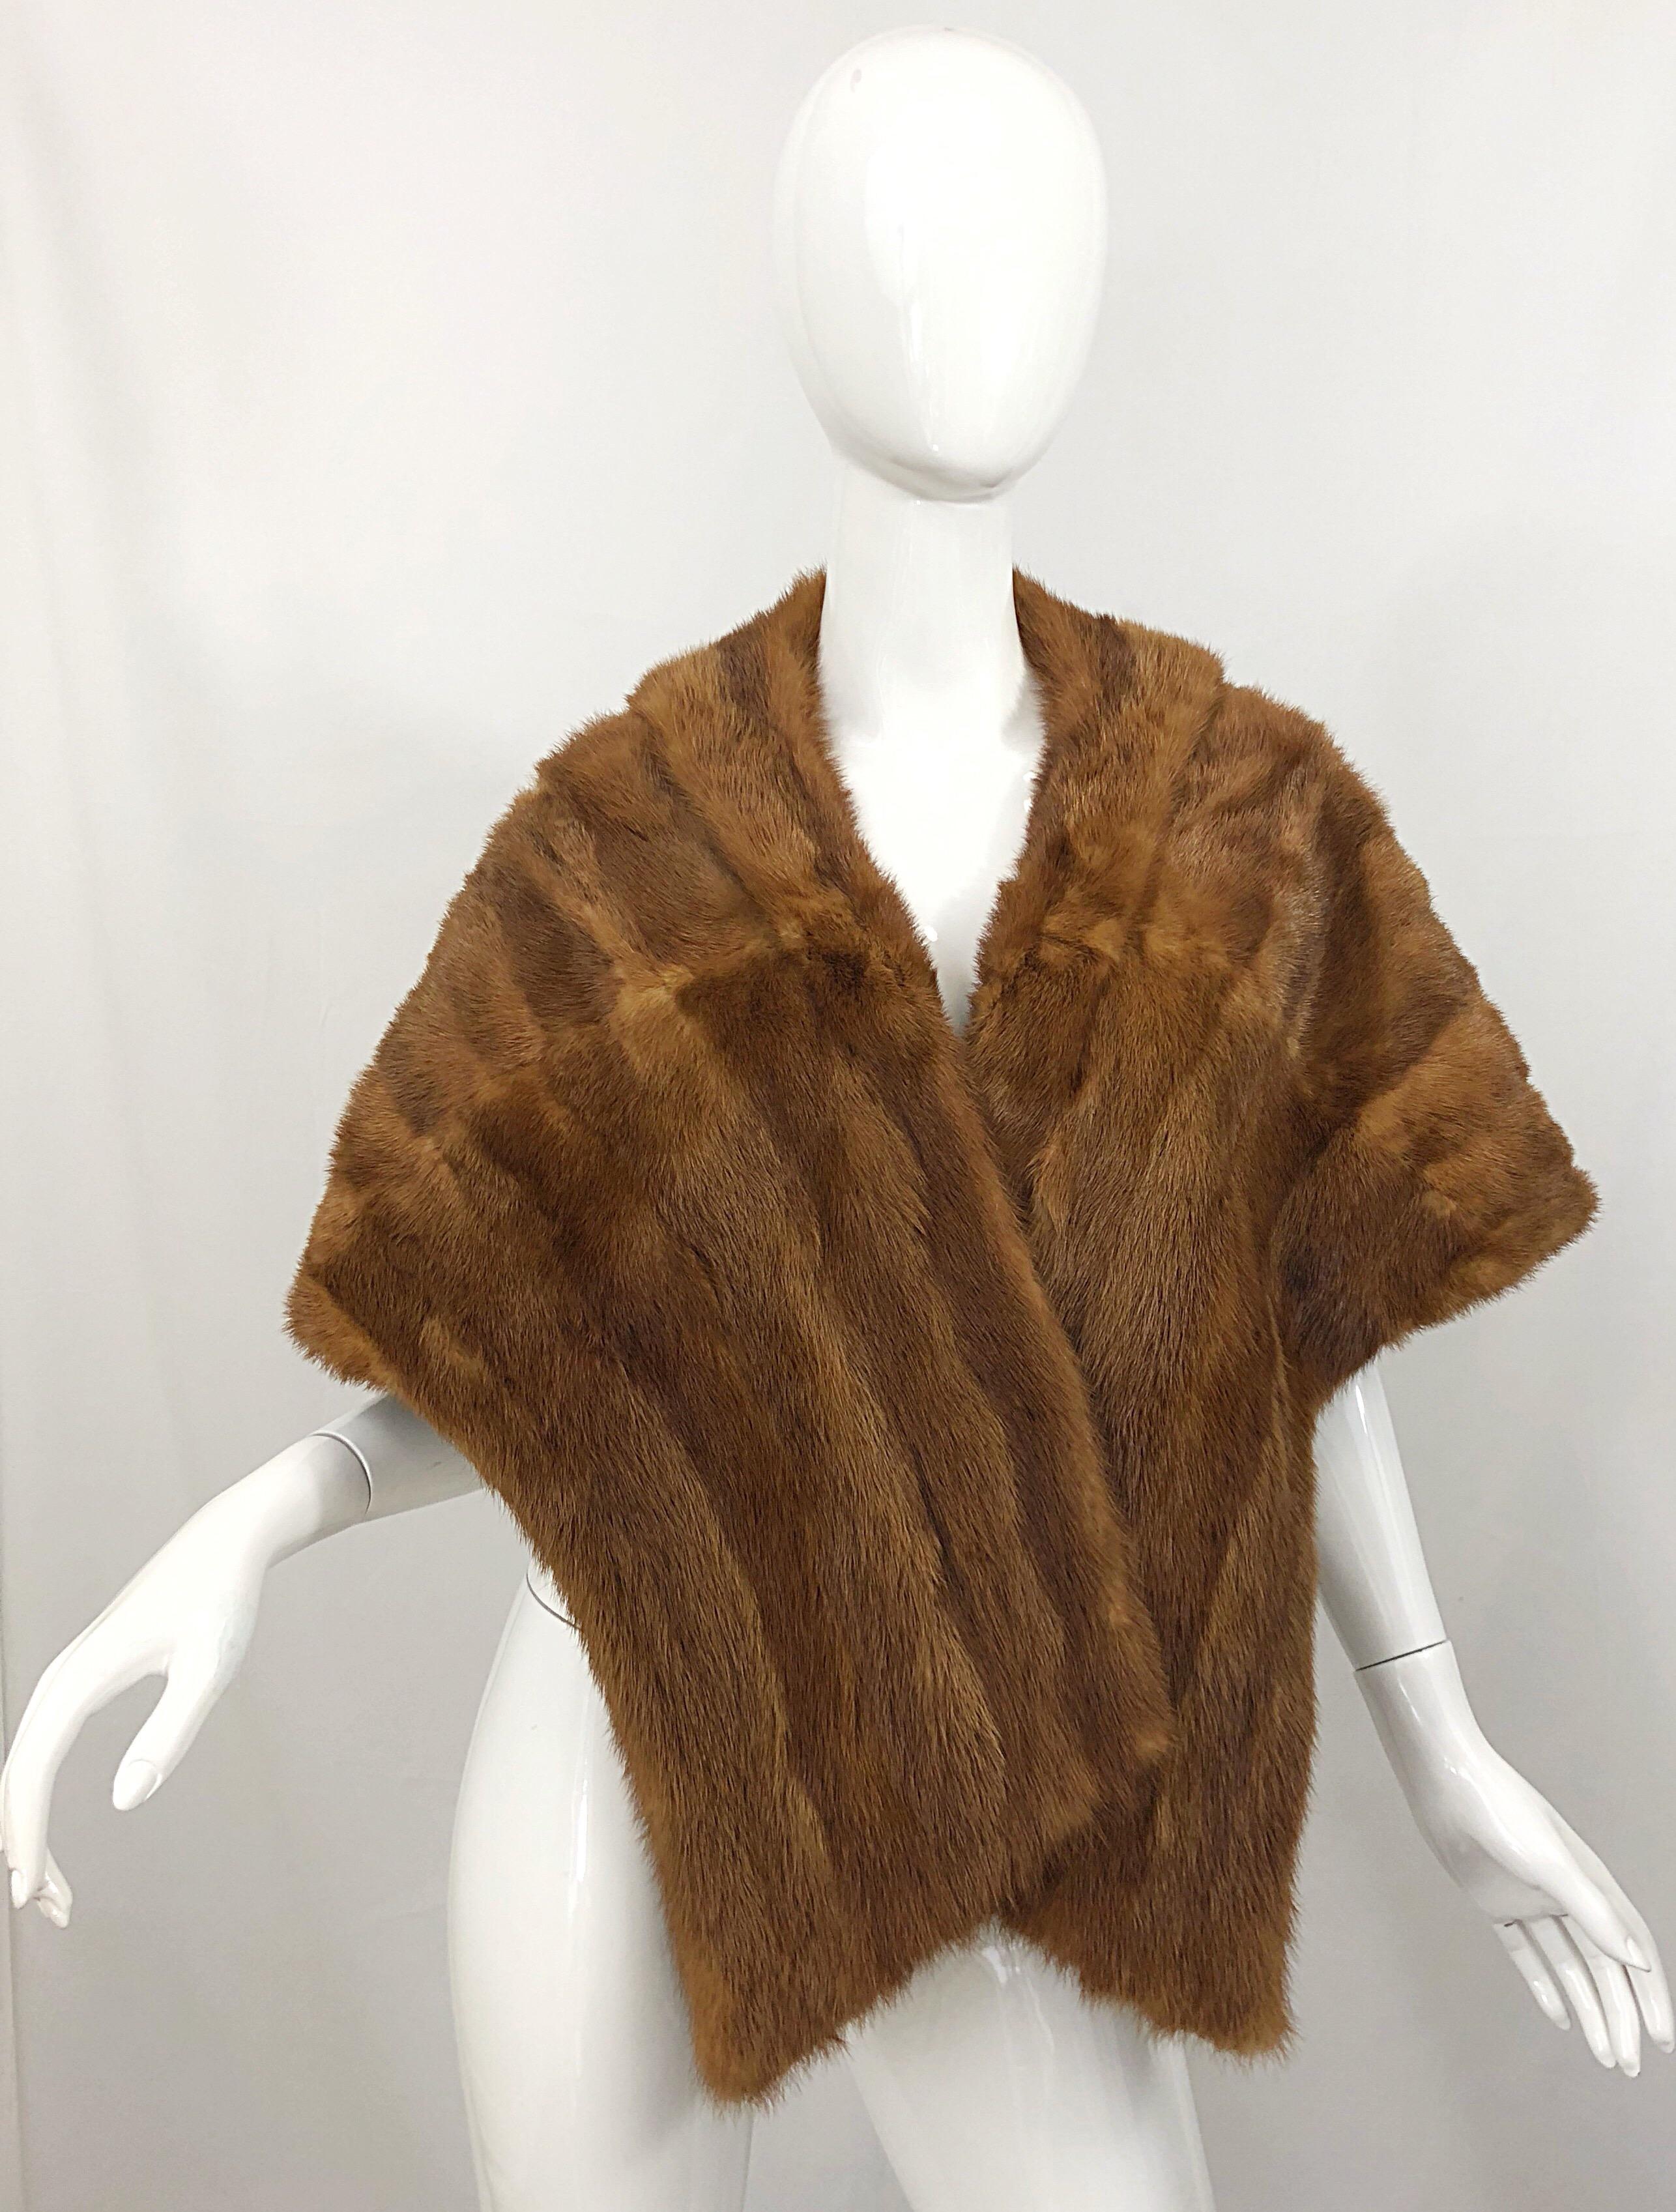 Luxurious 1950s light brown (pastel) large stole wrap! Super soft mink fur that will keep you warm while looking stylish. Lined in taupe silk, with a pocket. Extremely well made and kept. 
Classic addition to any wardrobe. Great over a dress or